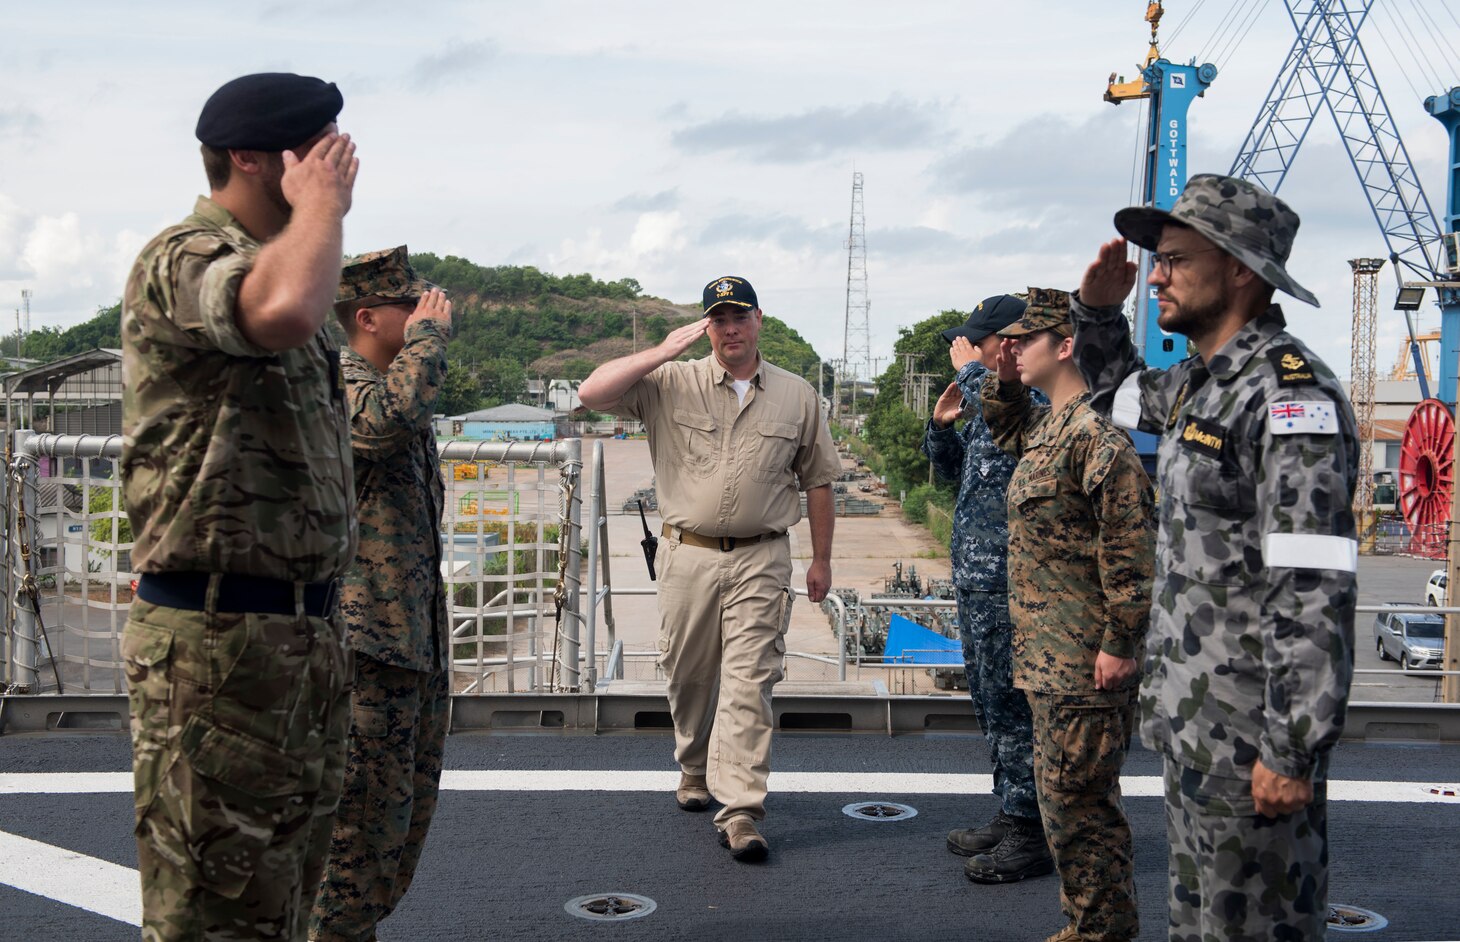 Capt. Charles Black, commanding officer of USNS Brunswick, salutes sideboys upon arrival to the opening ceremony of Pacific Partnership 2018 (PP18) Thailand aboard Military Sealift Command expeditionary fast transport ship USNS Brunswick (T-EPF 6). PP18’s mission is to work collectively with host and partner nations to enhance regional interoperability and disaster response capabilities, increase stability and security in the region, and foster new and enduring friendships across the Indo-Pacific Region. Pacific Partnership, now in its 13th iteration, is the largest annual multinational humanitarian assistance and disaster relief preparedness mission conducted in the Indo-Pacific.